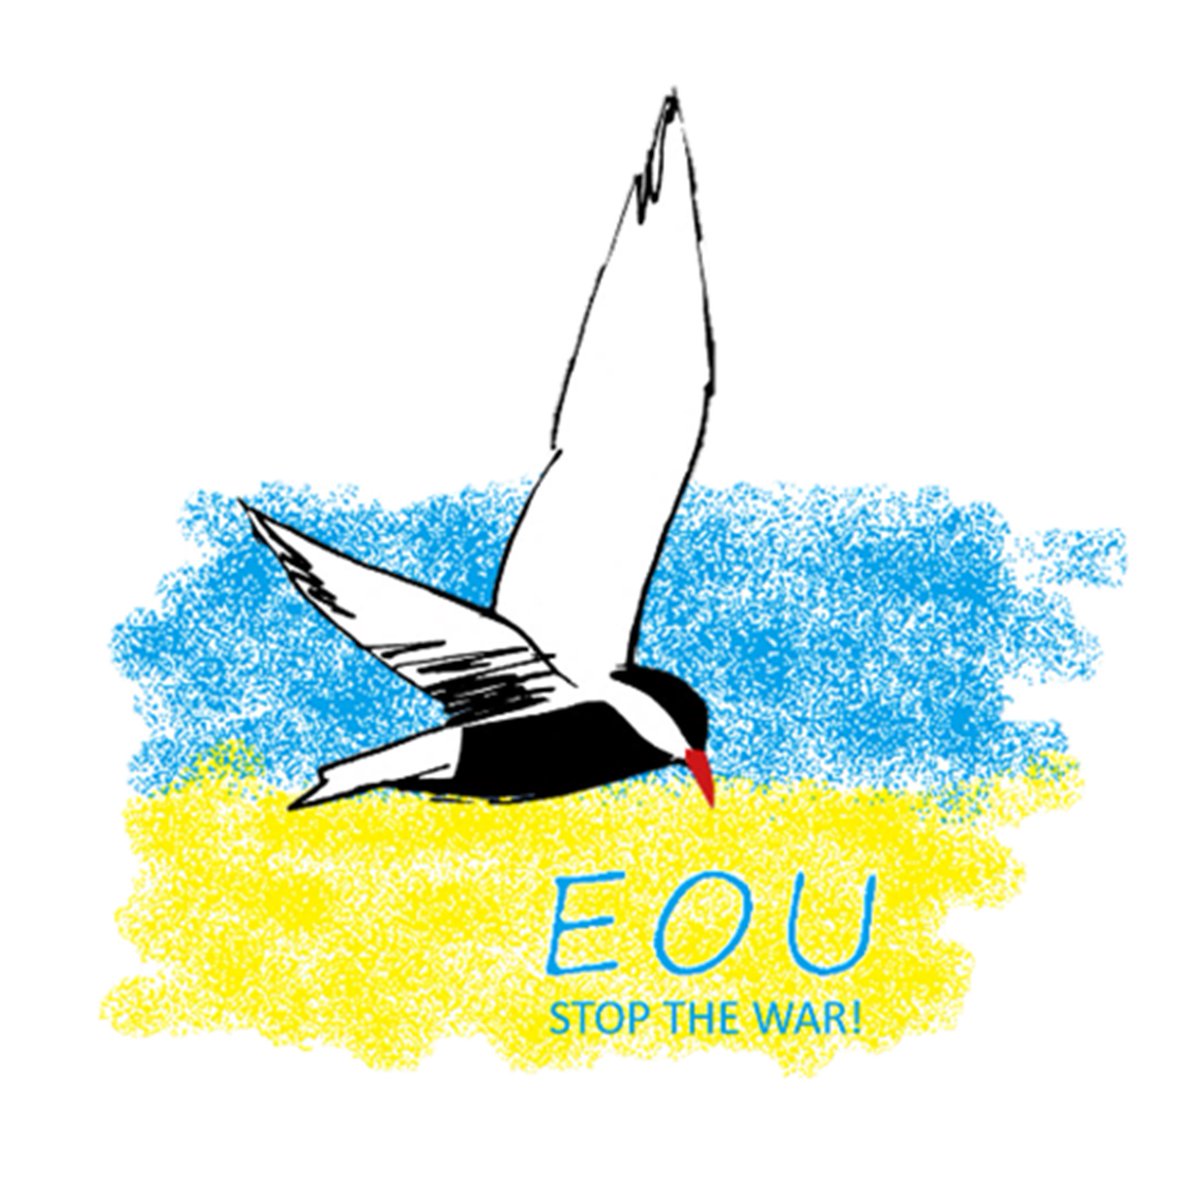 Calling all ornithologists! ABSTRACT SUBMISSION DEADLINE 15th JANUARY for the #EOU2023 conference, Lund, August 2023 – submit your abstracts and find out further information about the conference here cutt.ly/nNE3SZK #ornithology